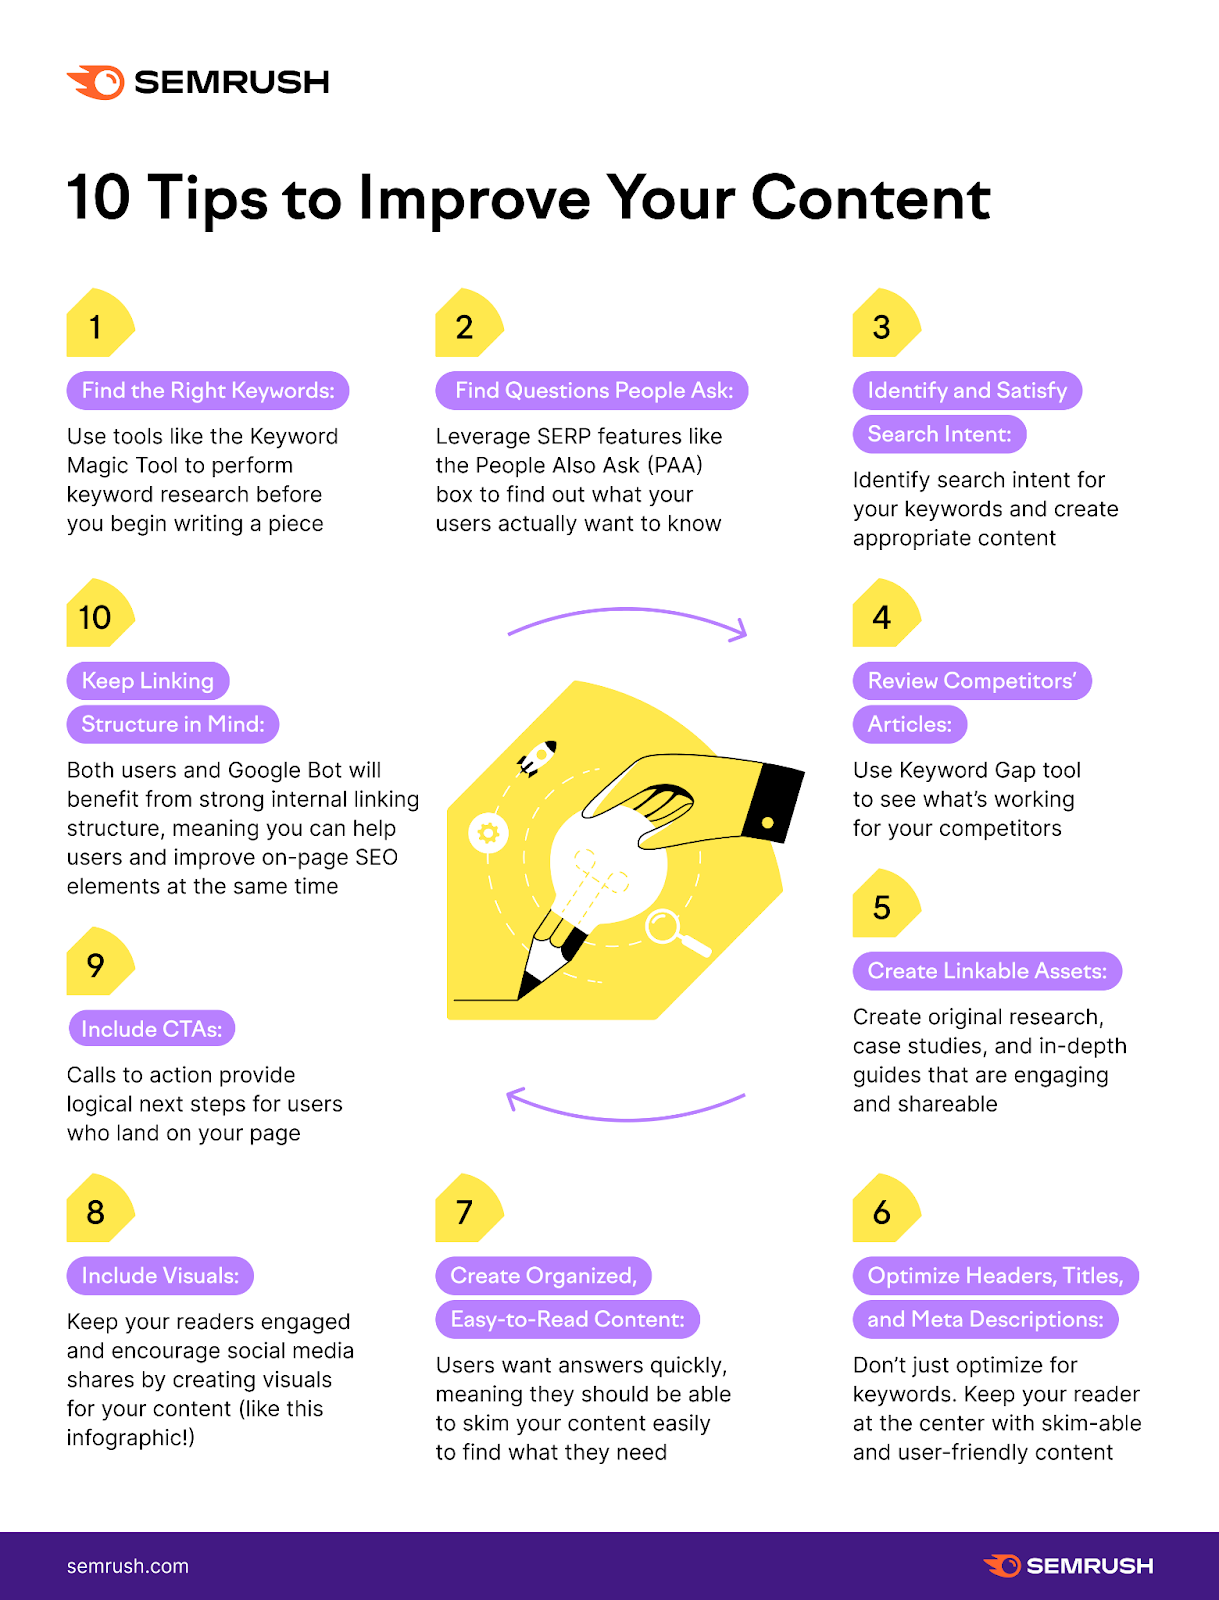 "10 tips to improve your content" infographic by Semrush